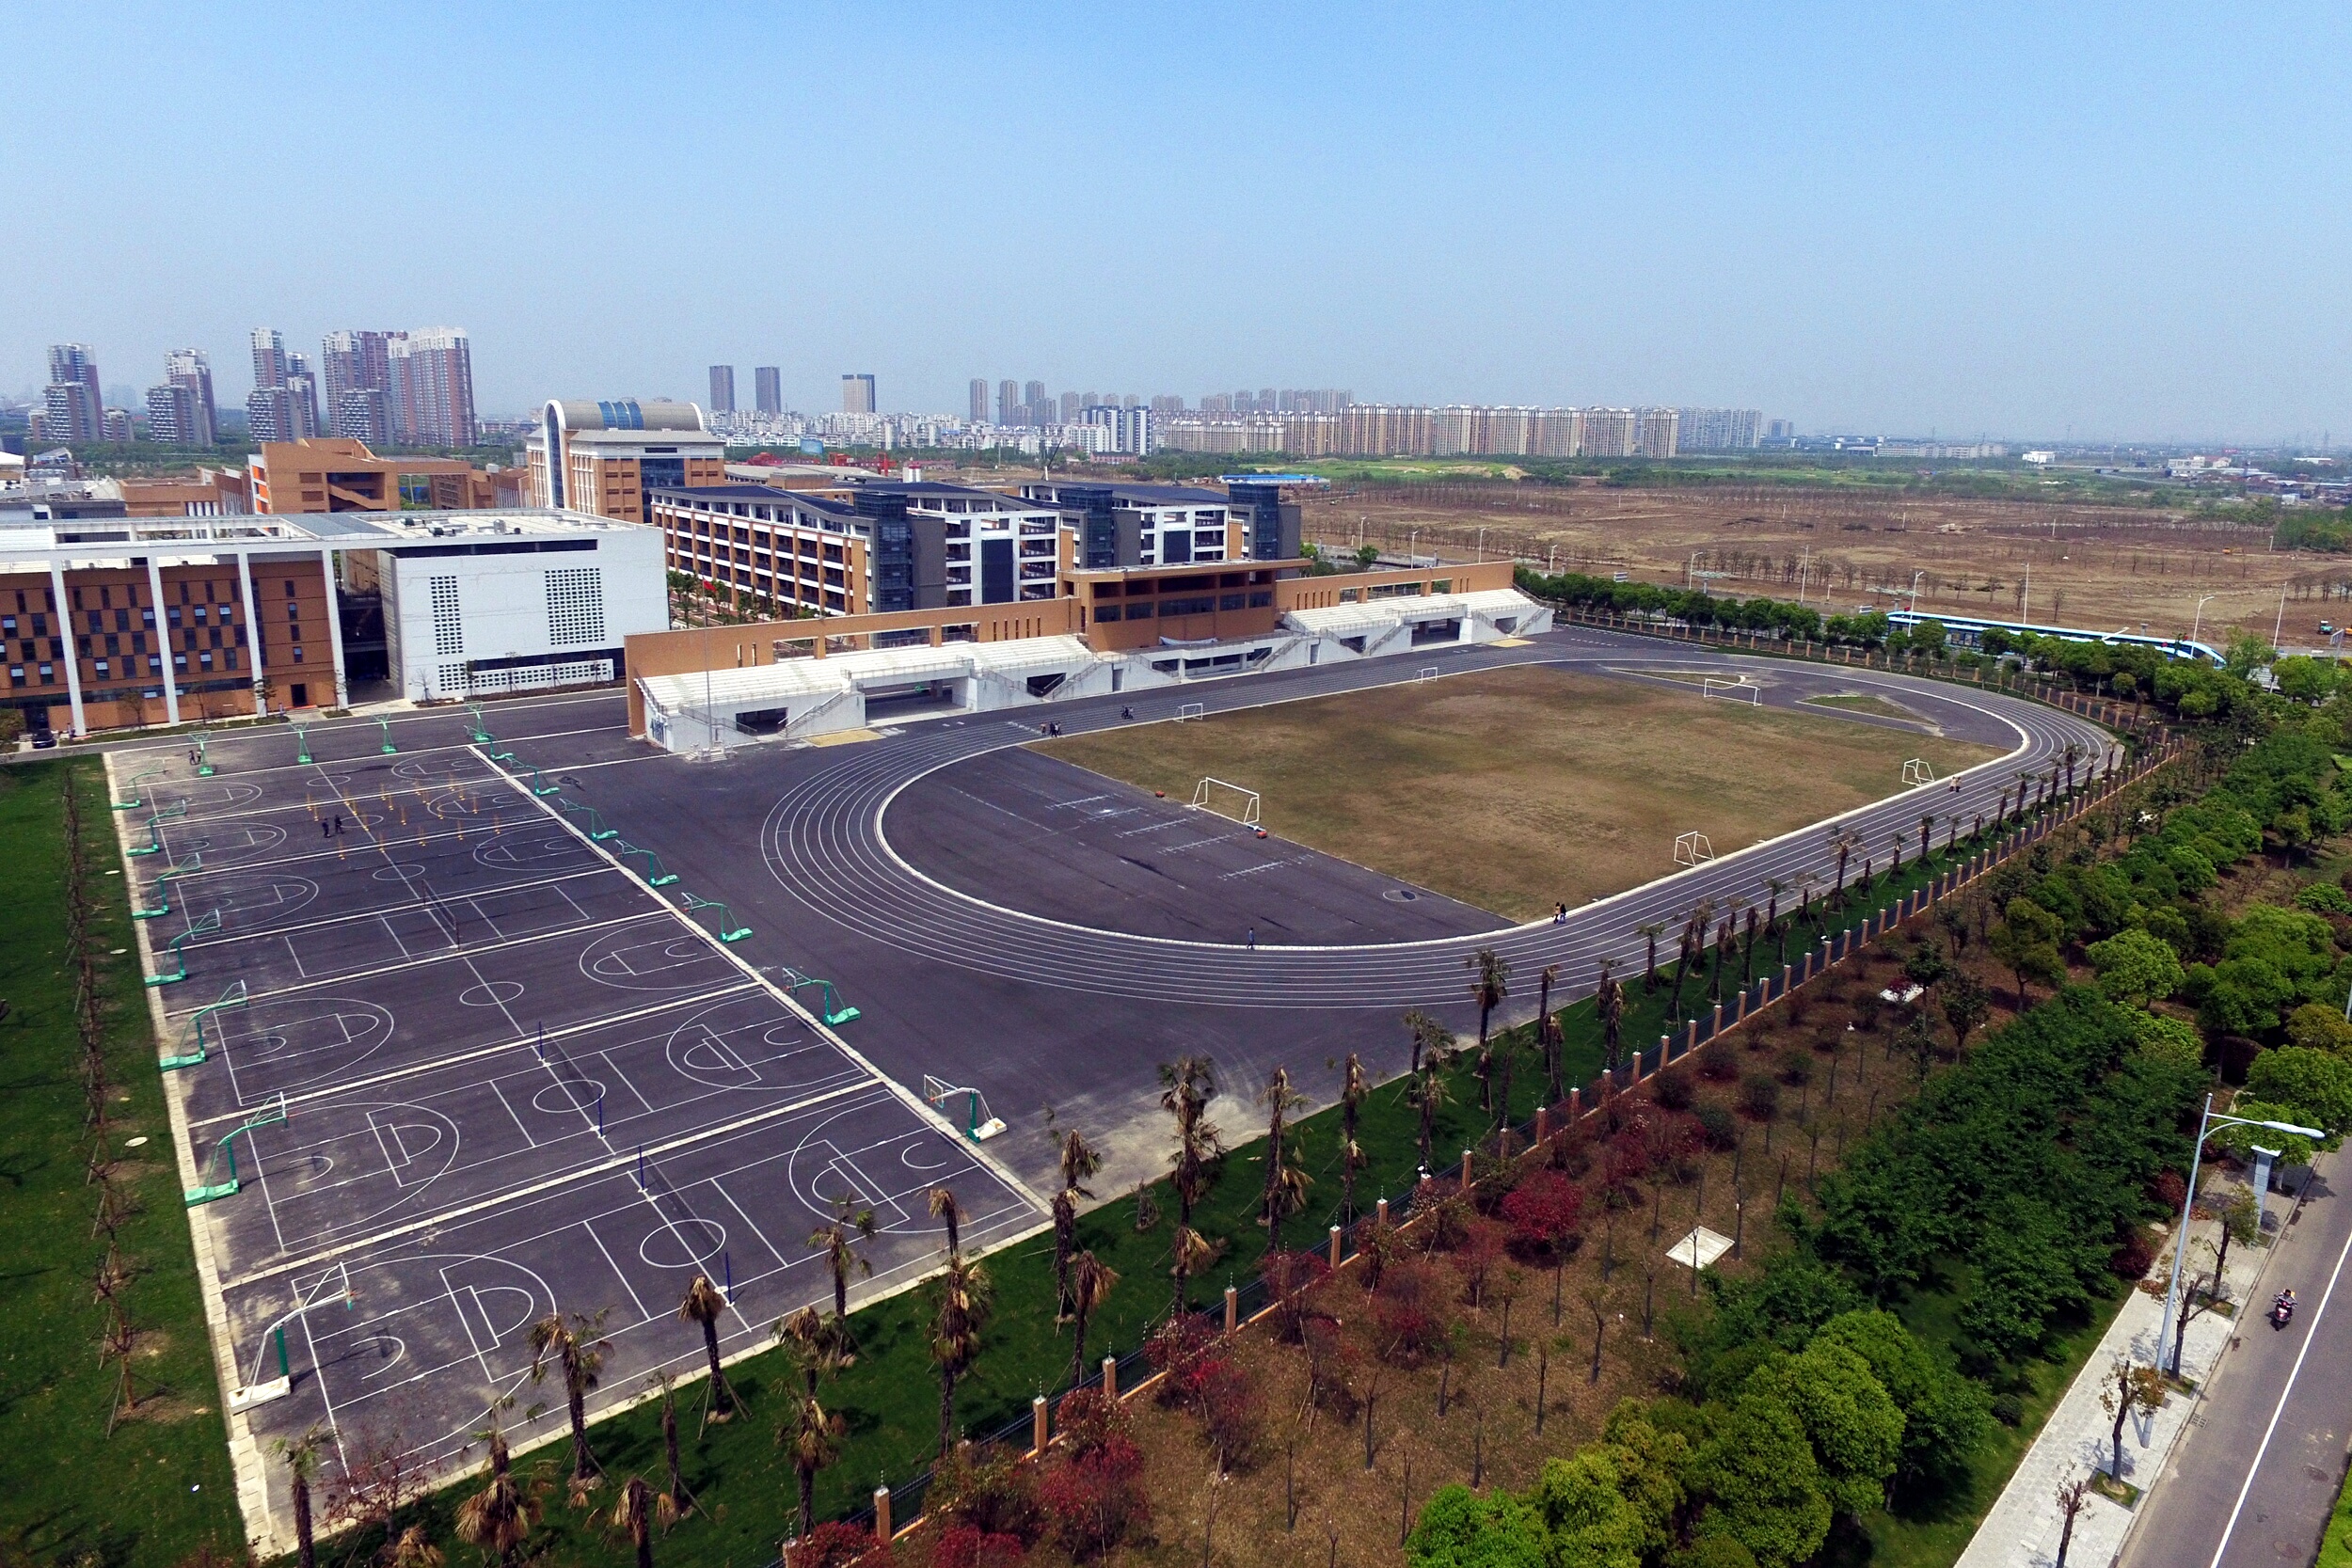 A view of the new campus of Changzhou Foreign Languages School near a toxic site in Changzhou city, China's Jiangsu province, on April 18, 2016 (Stringer/Imaginechina/AP)